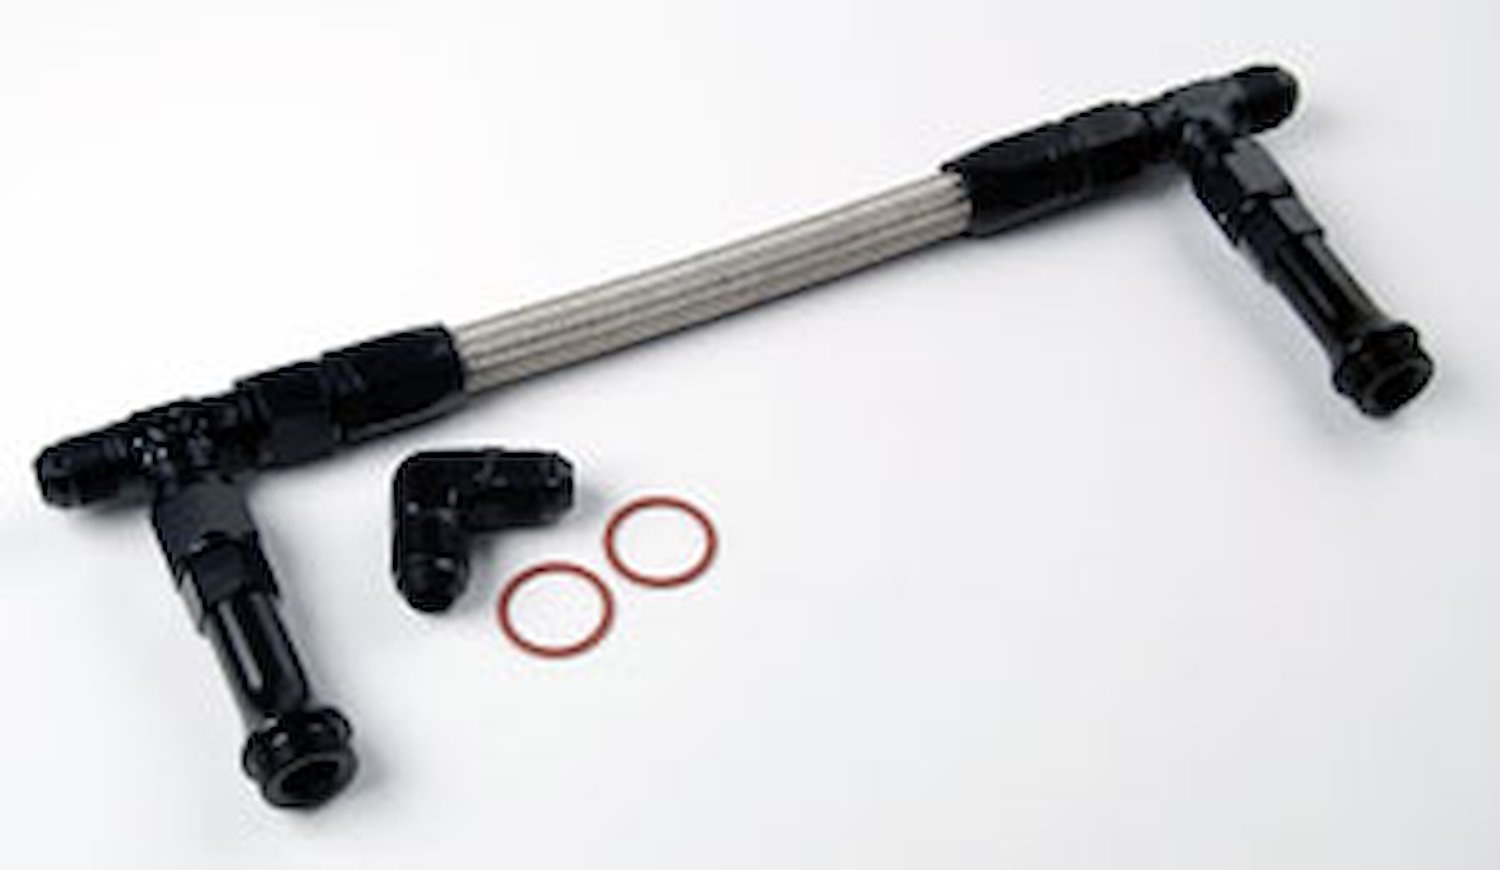 Dual Feed Fuel Line (Fuel Log) Kit for